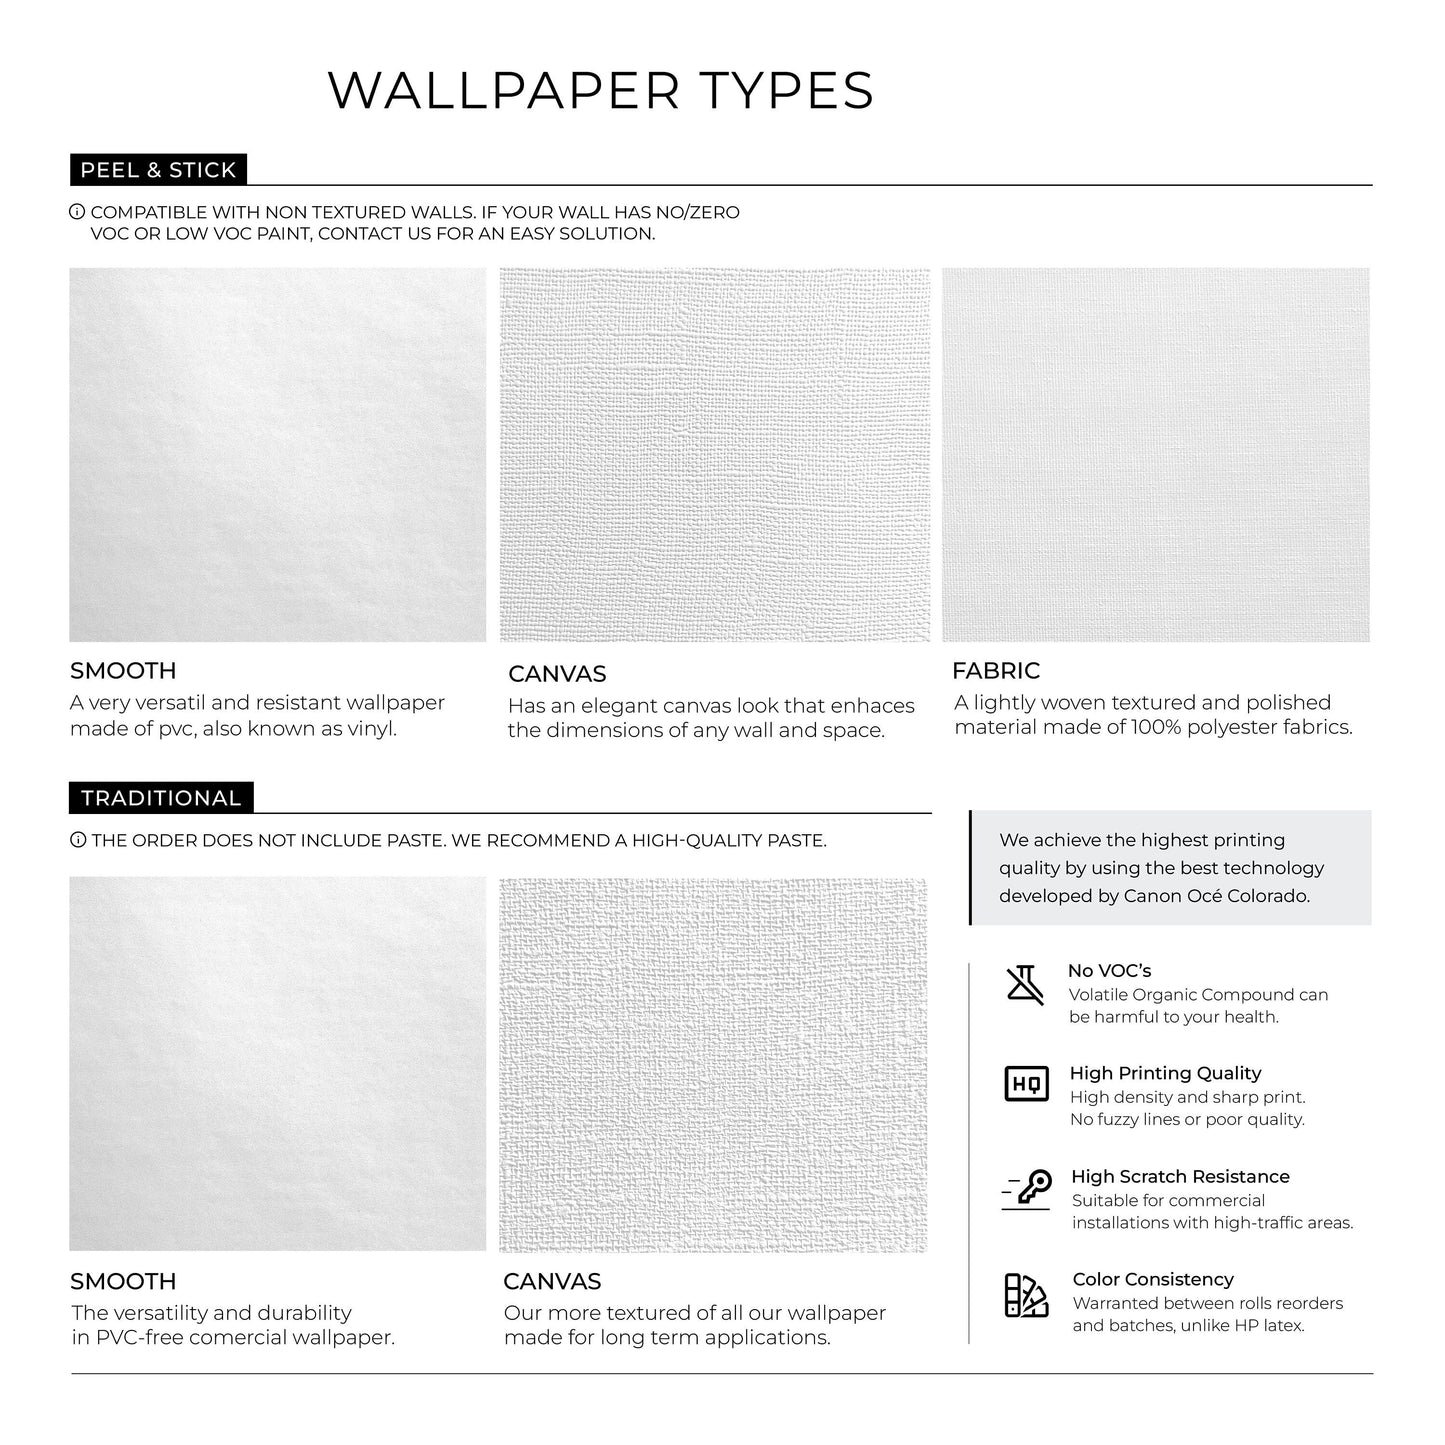 Removable Wallpaper Wall Temporary Wallpaper Nursery Wallpaper Wall Decor Wall Paper Removable Peel and Stick Wallpaper - A603